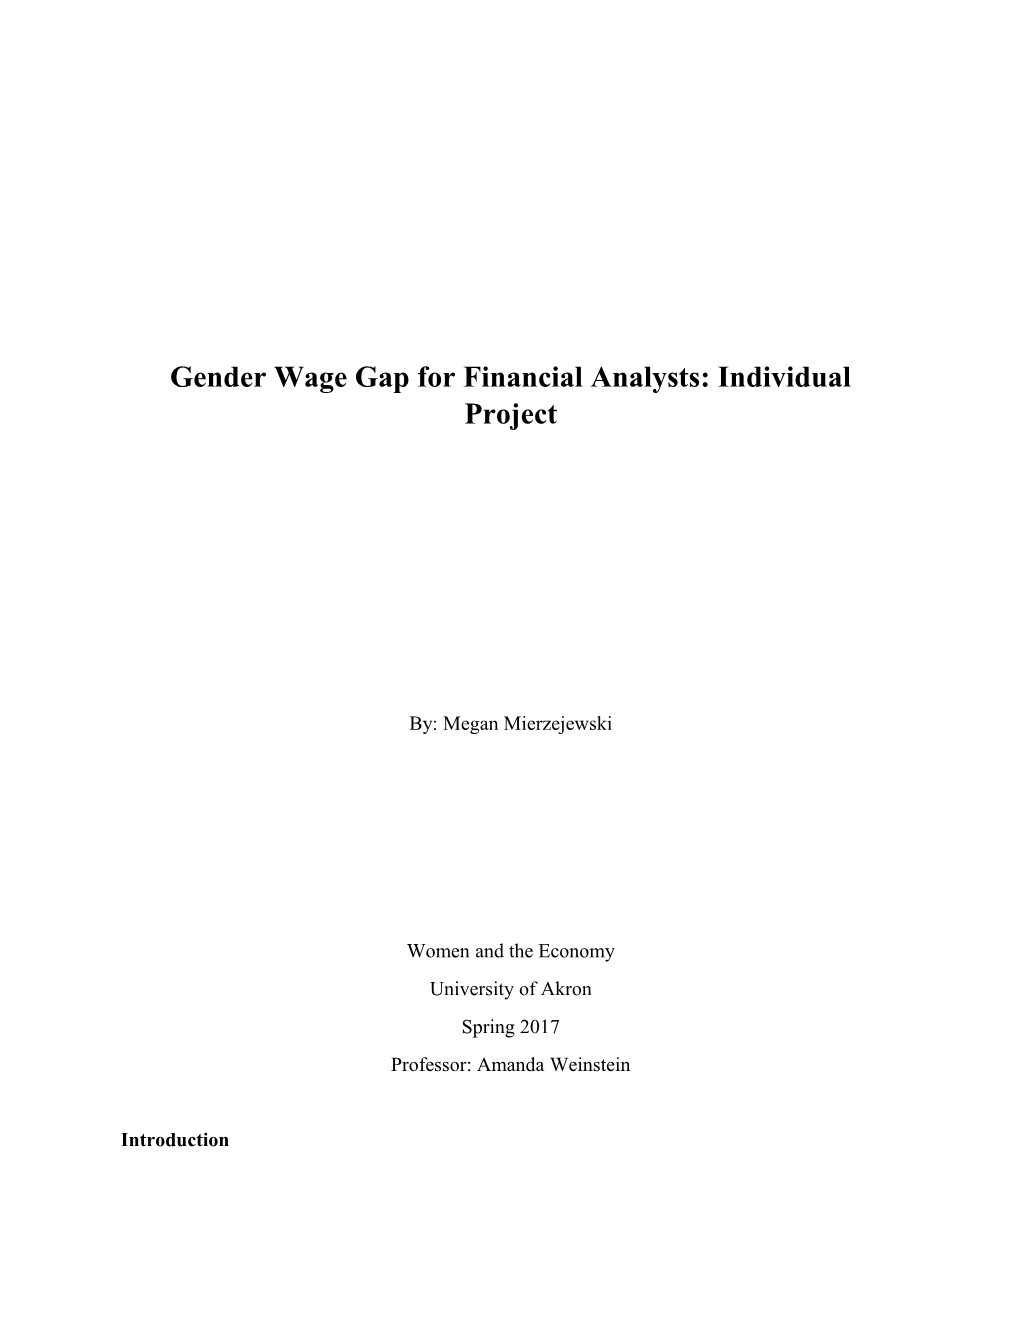 Gender Wage Gap for Financial Analysts: Individual Project